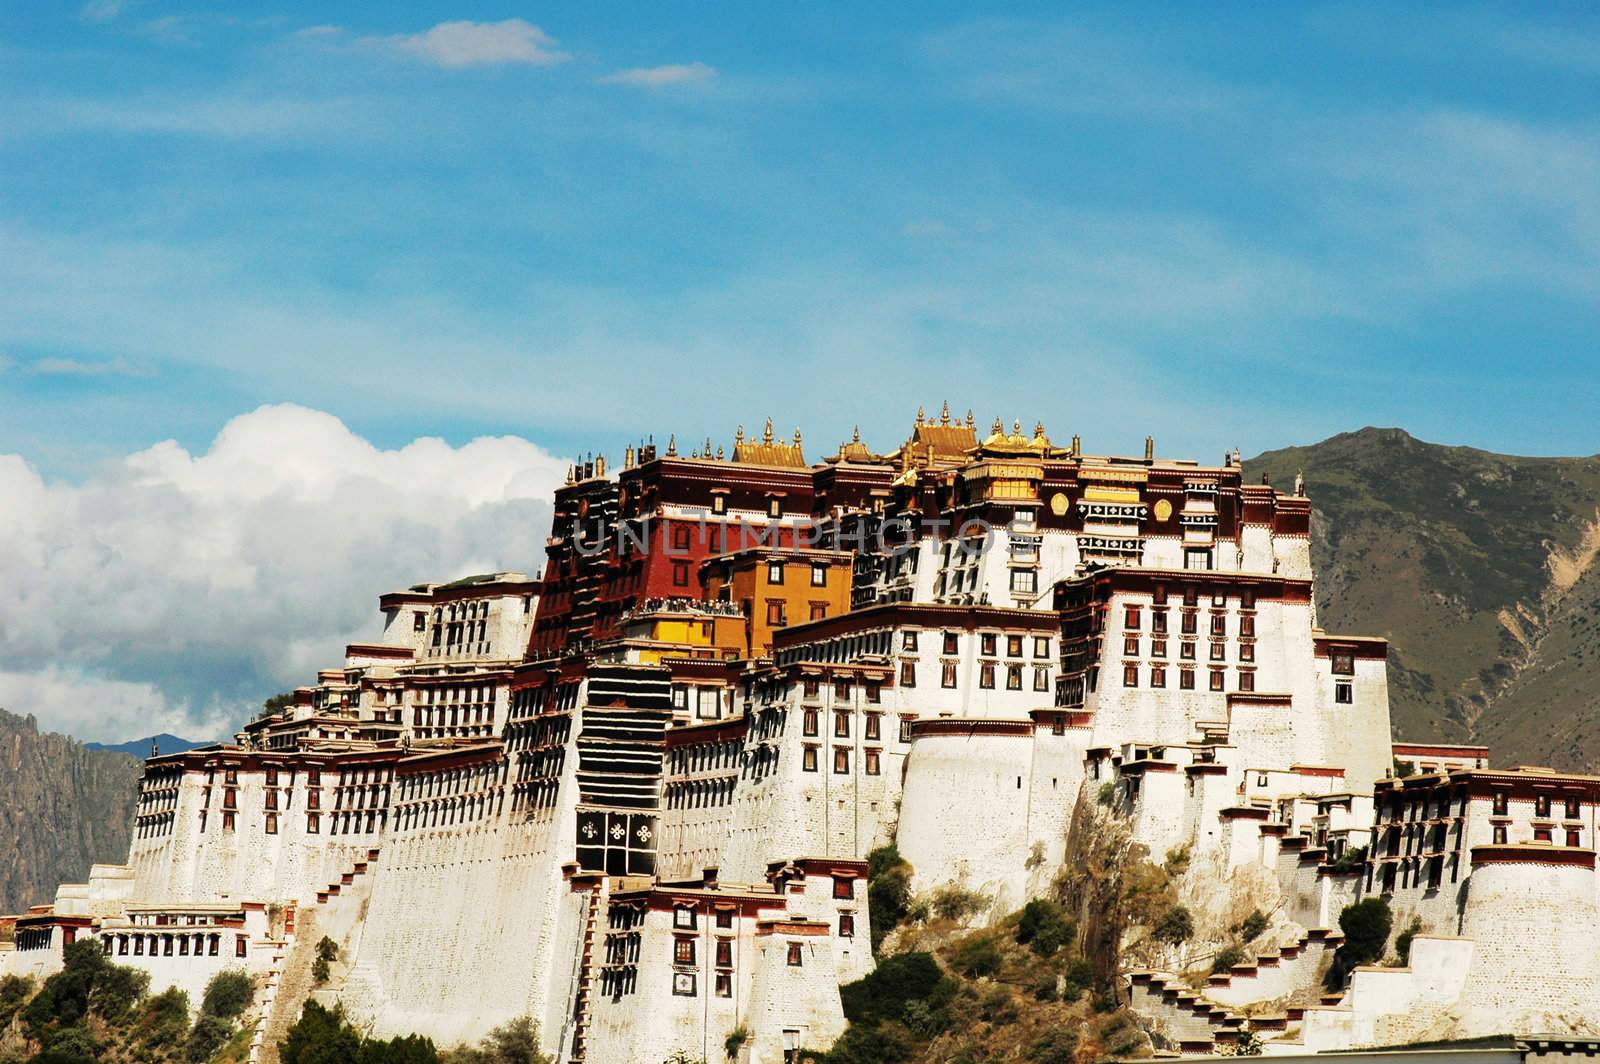 Landscape of the famous Potala Palace in Lhasa Tibet